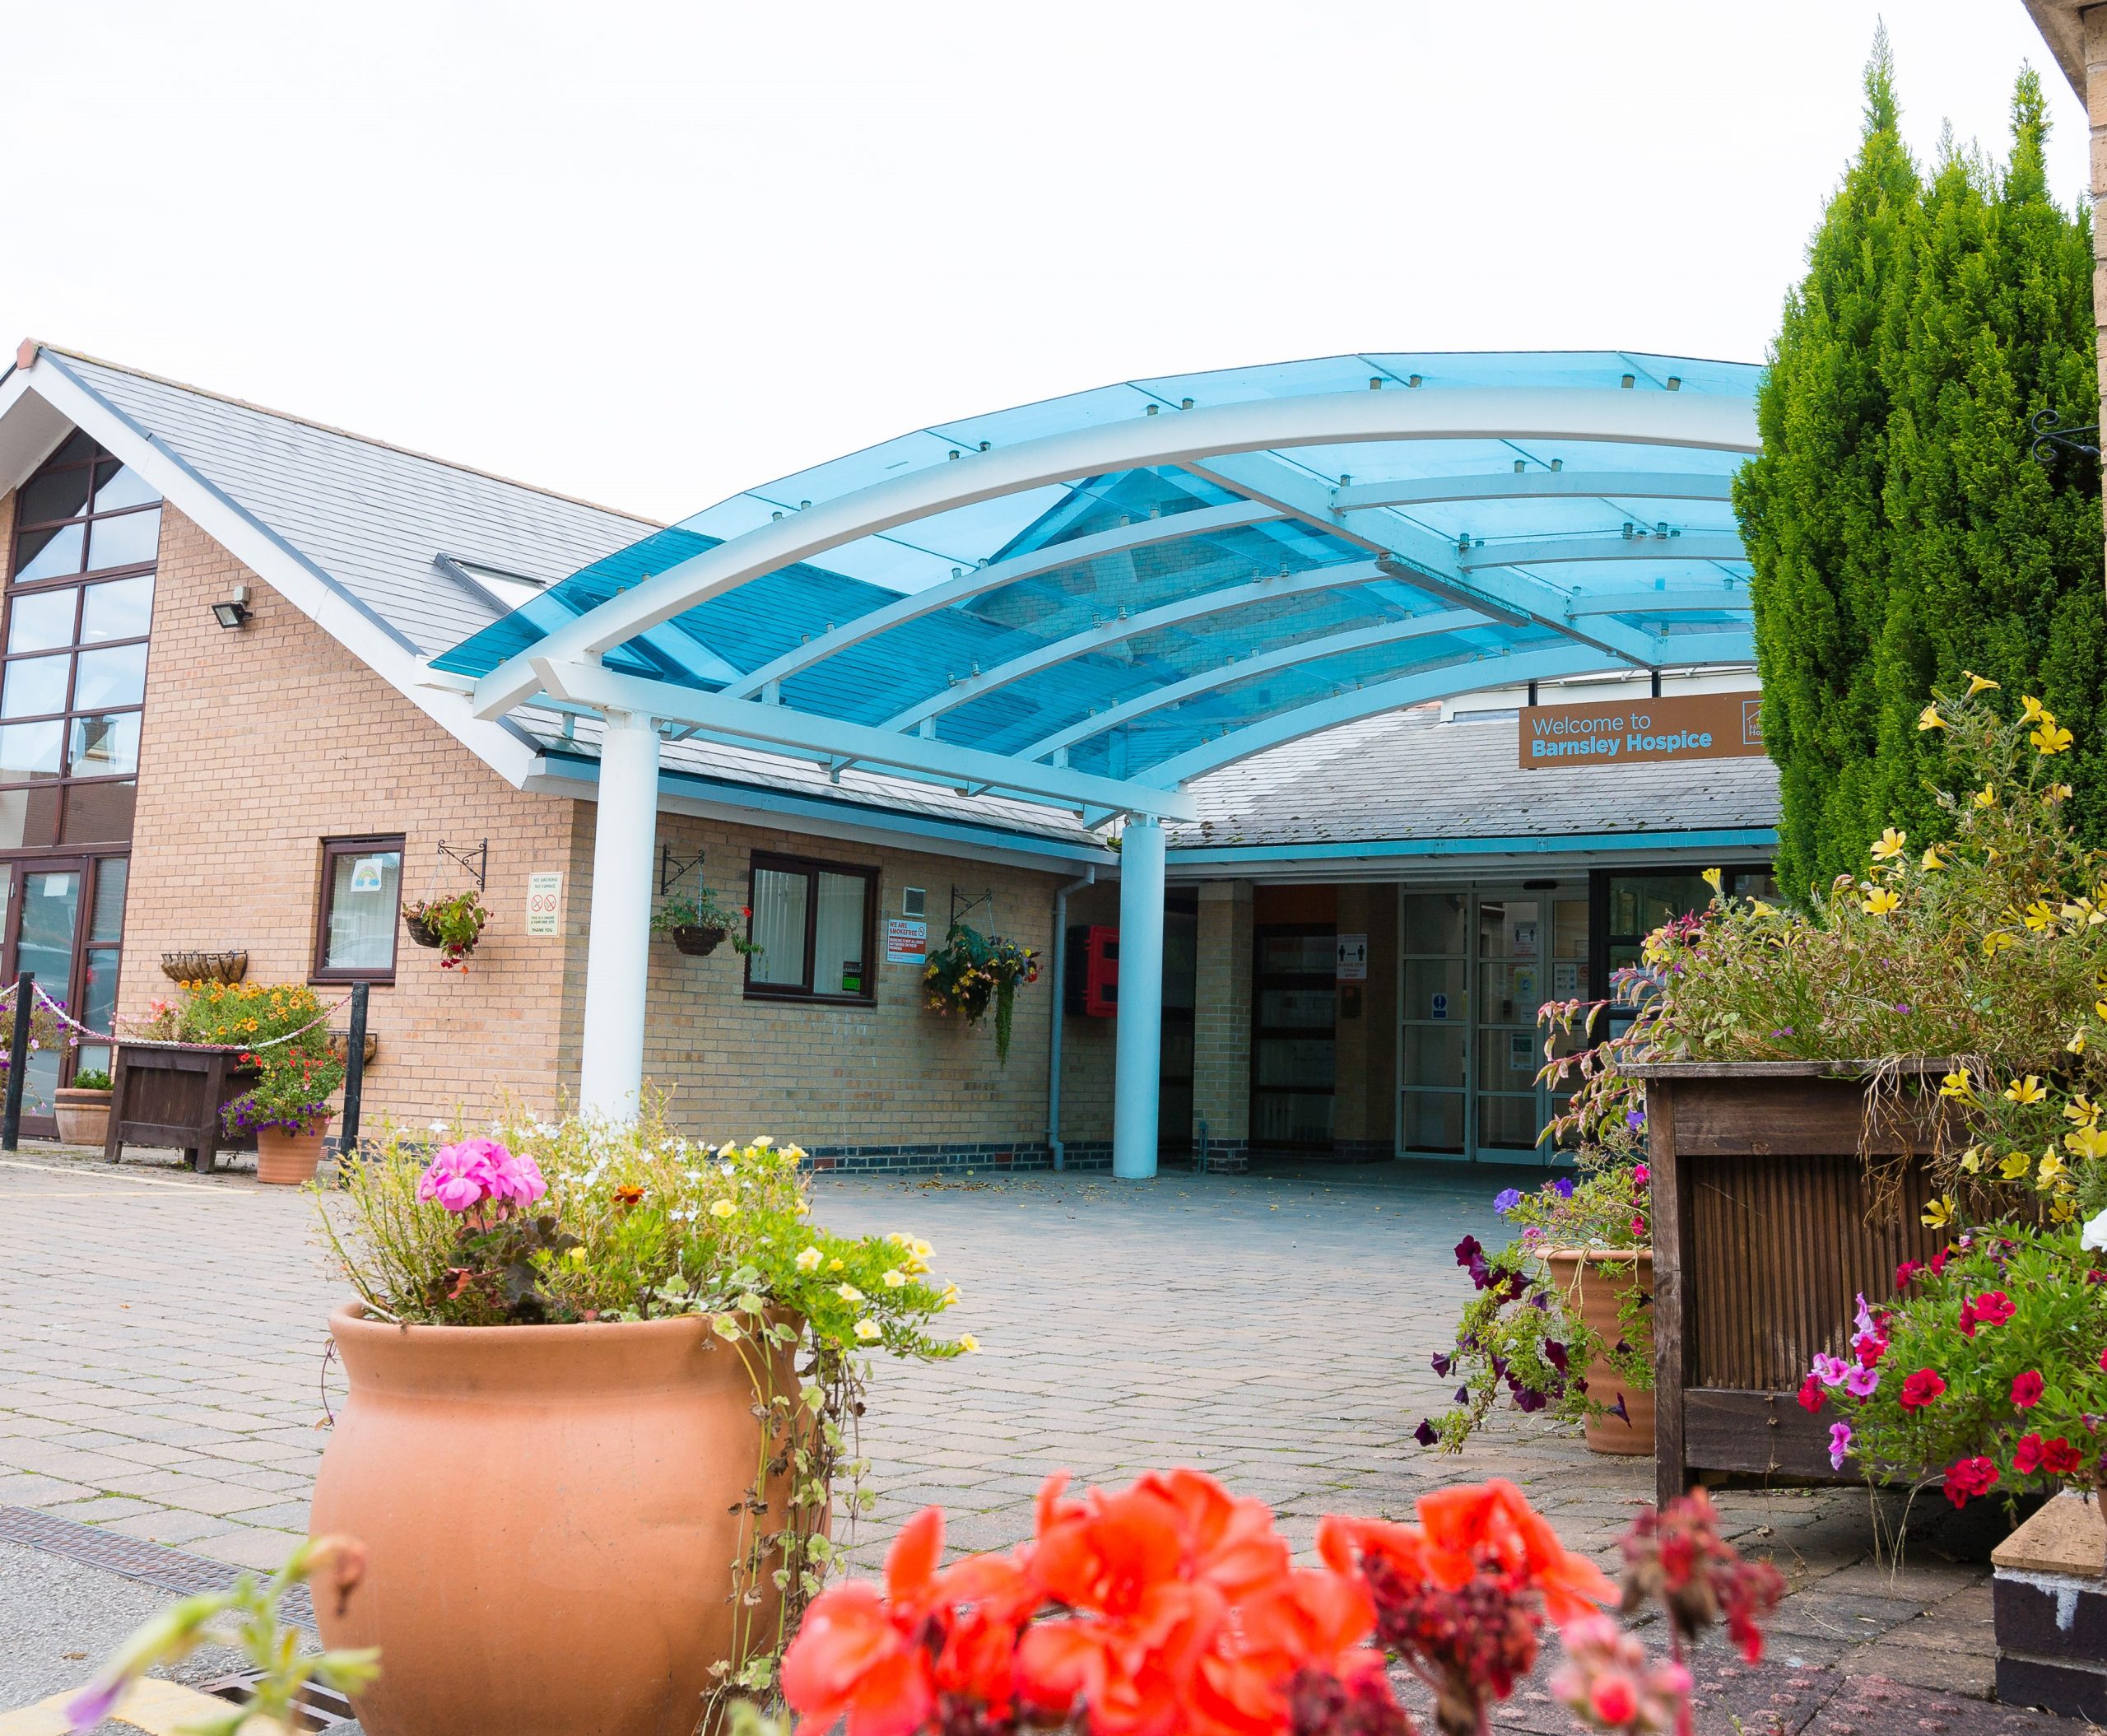 Photo of the exterior of the Barnsley Hospice